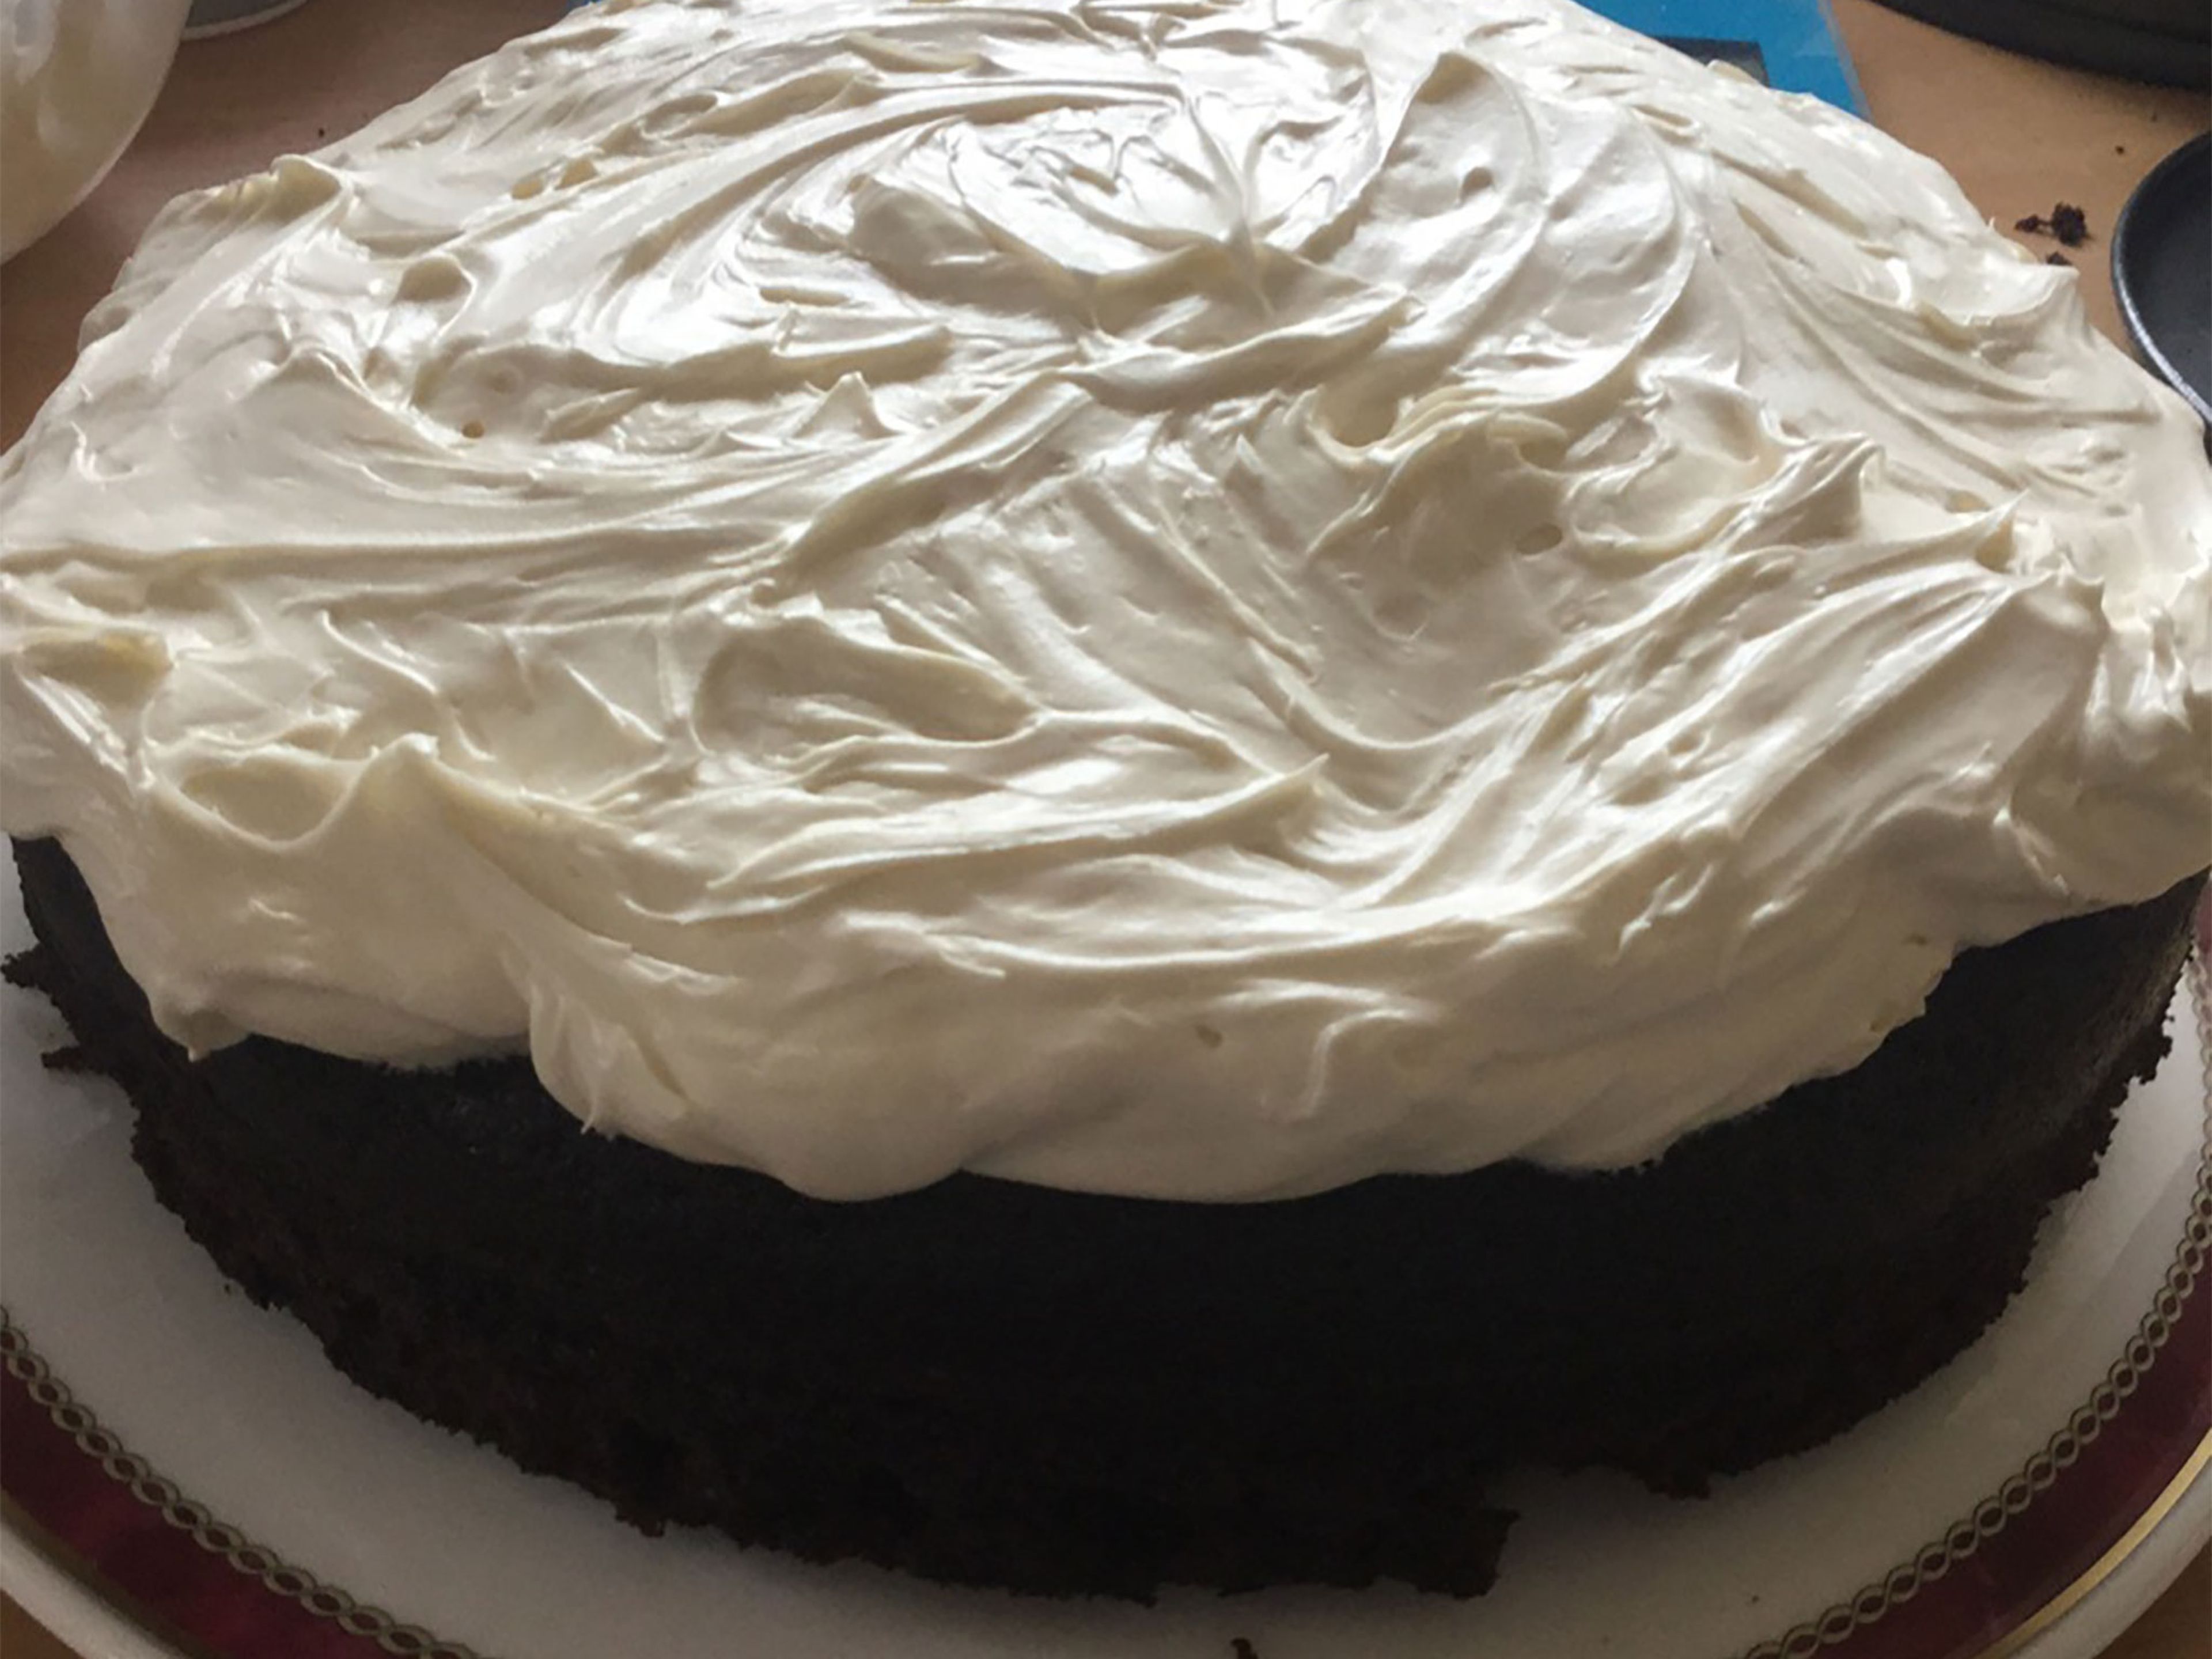 To make the frosting, lightly whip the cream cheese until it is smooth. Sift the powdered sugar into the cream cheese and beat them together. Add heavy cream and further beat to achieve a spreadable consistency. Spread the frosting on the cooled cake and serve.